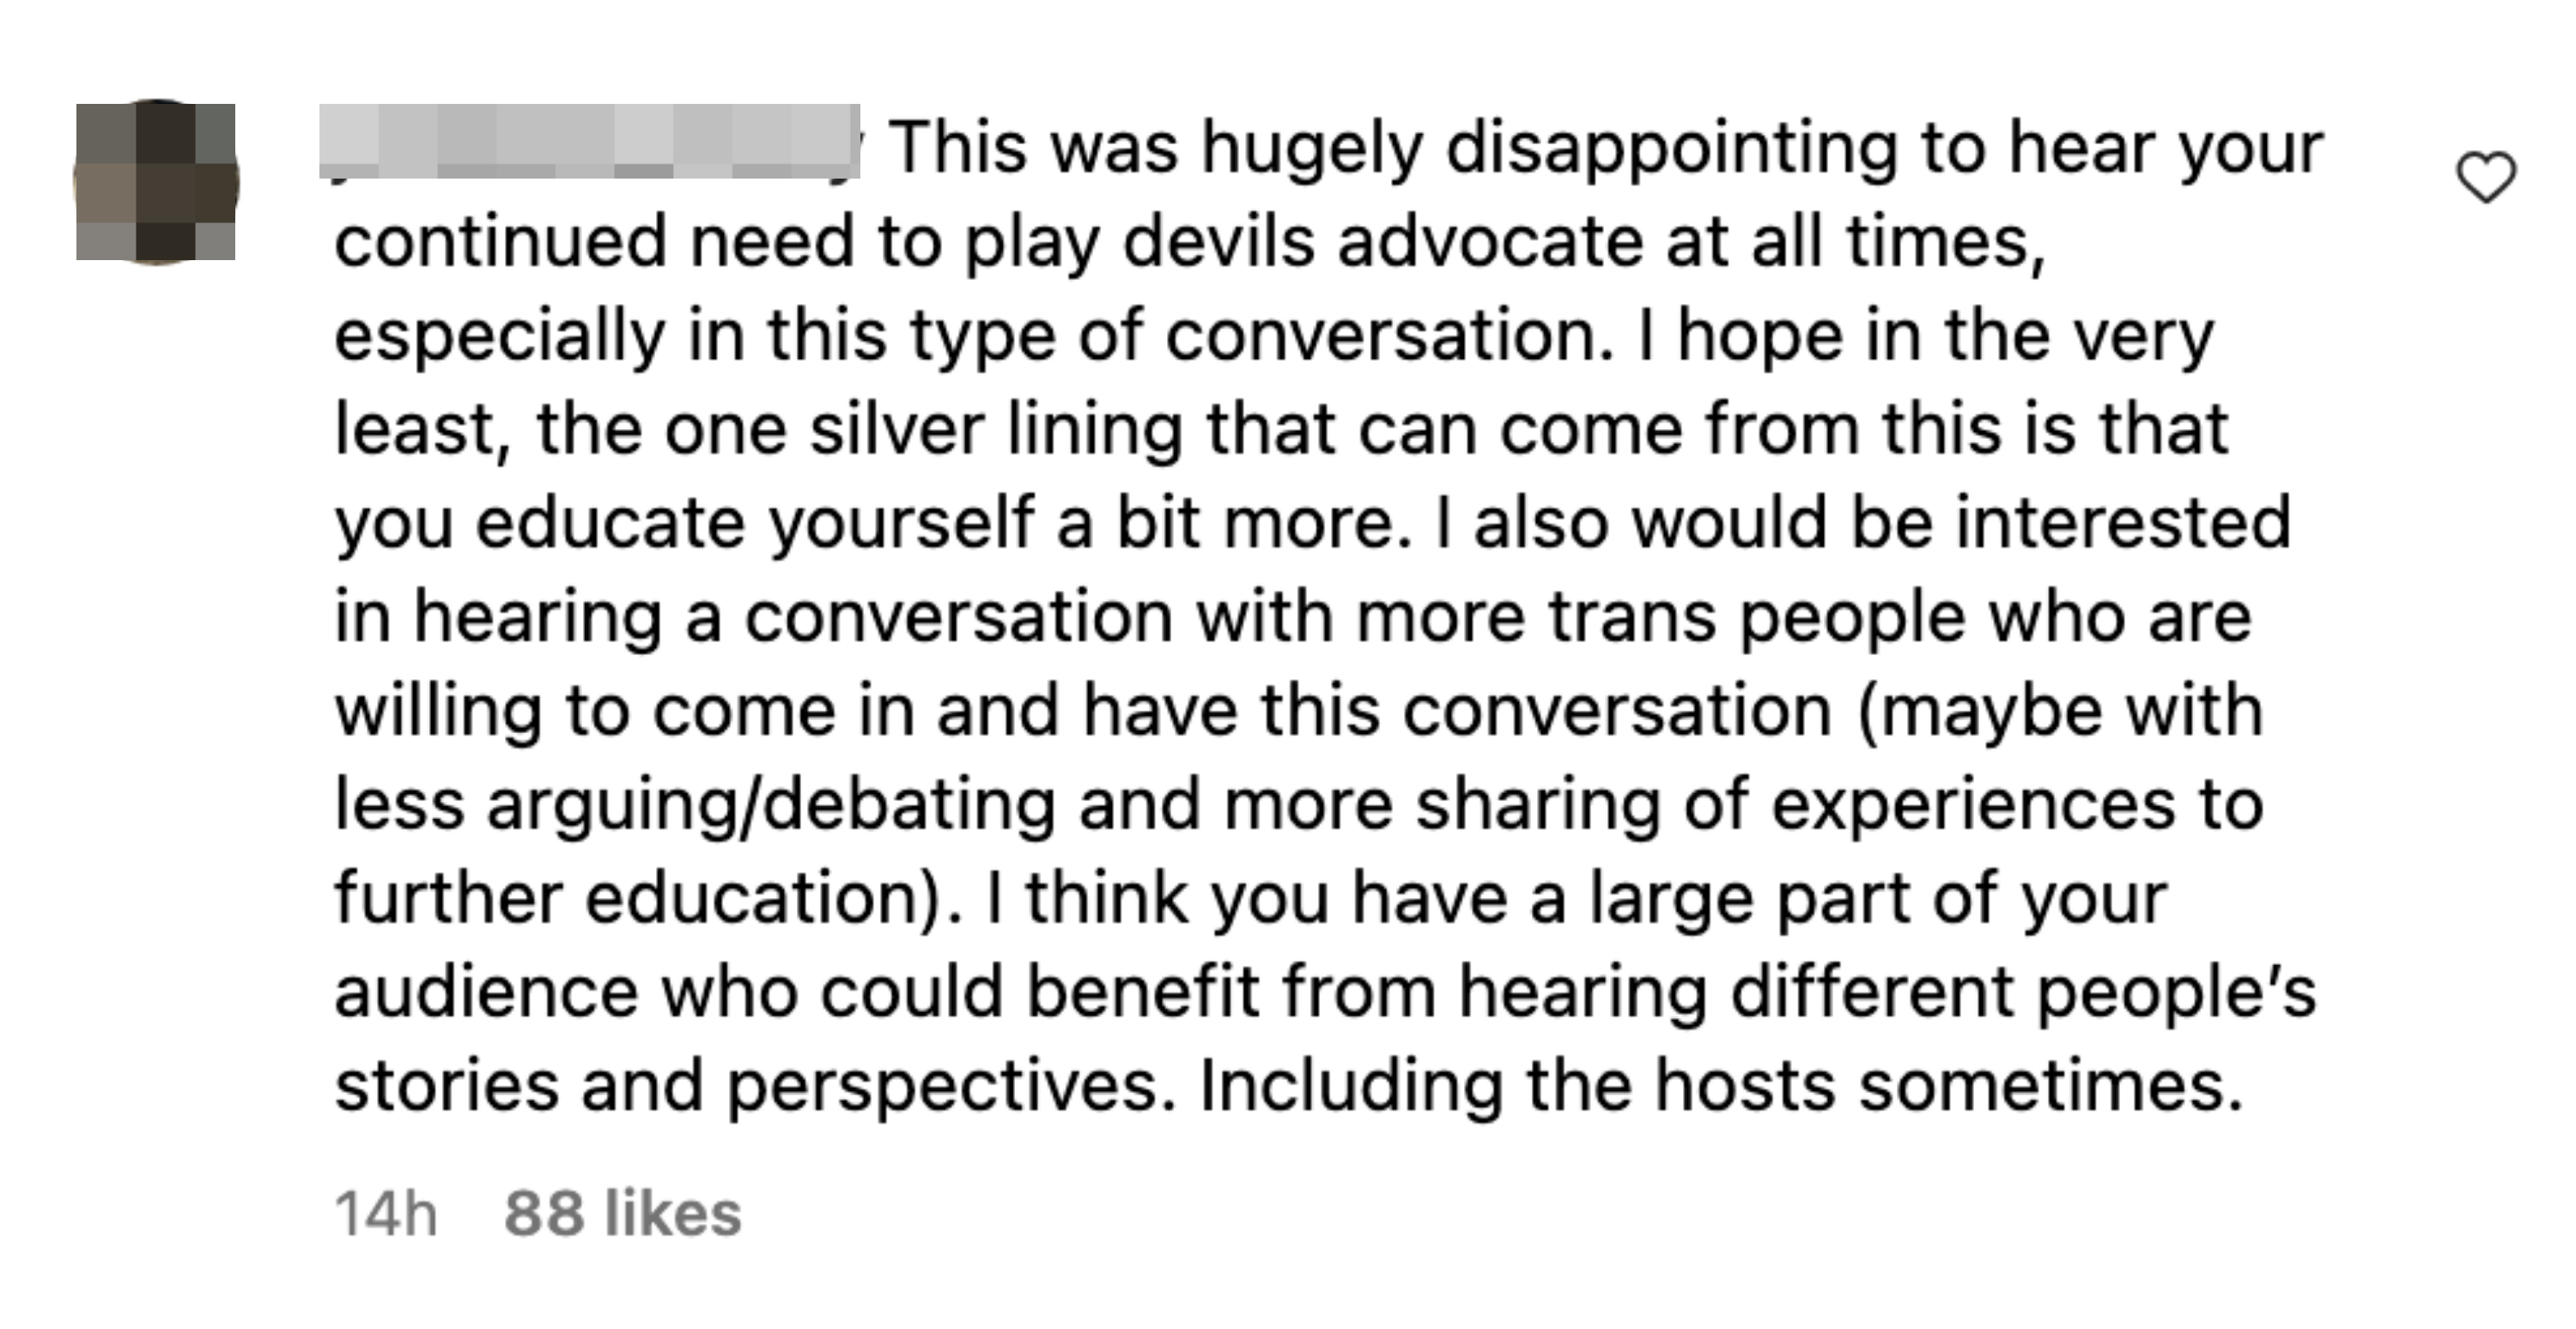 “This was hugely disappointing to hear your continued need to play devil&#x27;s advocate at all times, especially in this type of conversation. I hope in the very least, the one silver lining that can come from this is that you educate yourself a bit more...&quot;